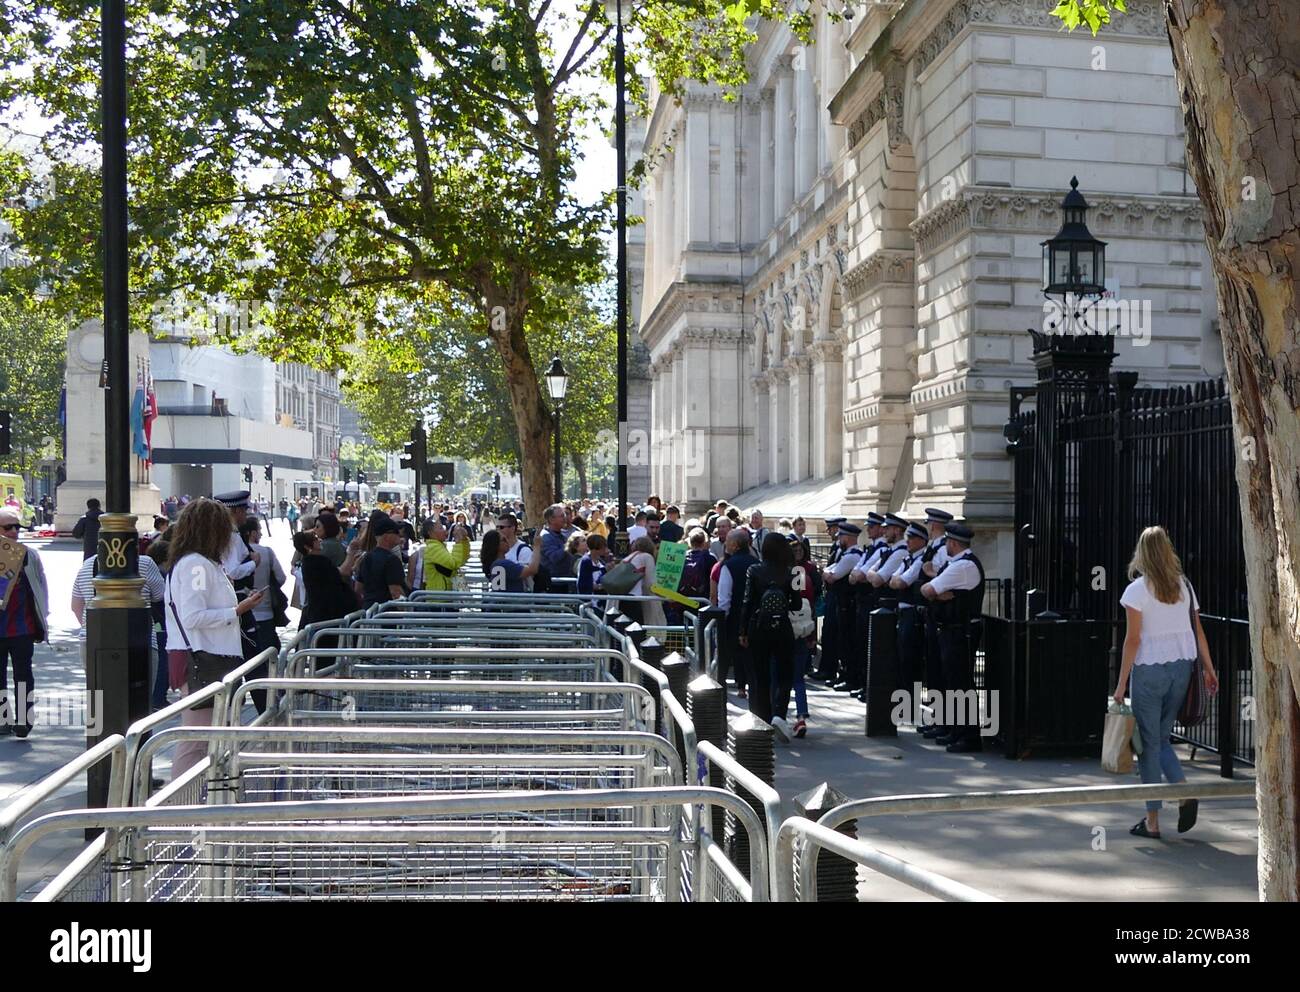 Downing Street, London, the office of the Prime Minister is protected by extra police, during the 20th September 2019 climate strike. Also known as the Global Week for Future, a series of international strikes and protests to demand action be taken to address climate change. The 20 September protests were likely the largest climate strikes in world history. Organisers reported that over 4 million people participated in strikes worldwide, including 300000 people joined UK protests Stock Photo